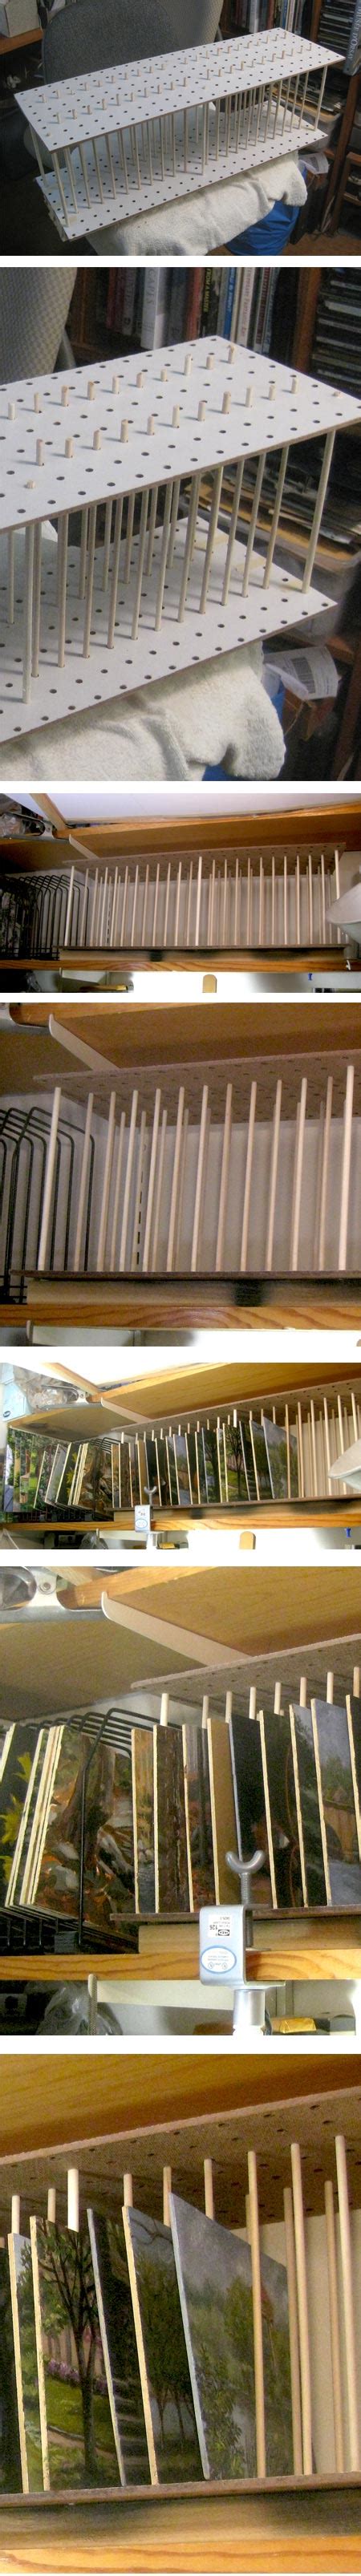 Even if you never want to try resin after reading my adventure at least you can make a nifty paint drying rack for. A simple DIY drying rack for plein air panels and small paintings - Lines and Colors